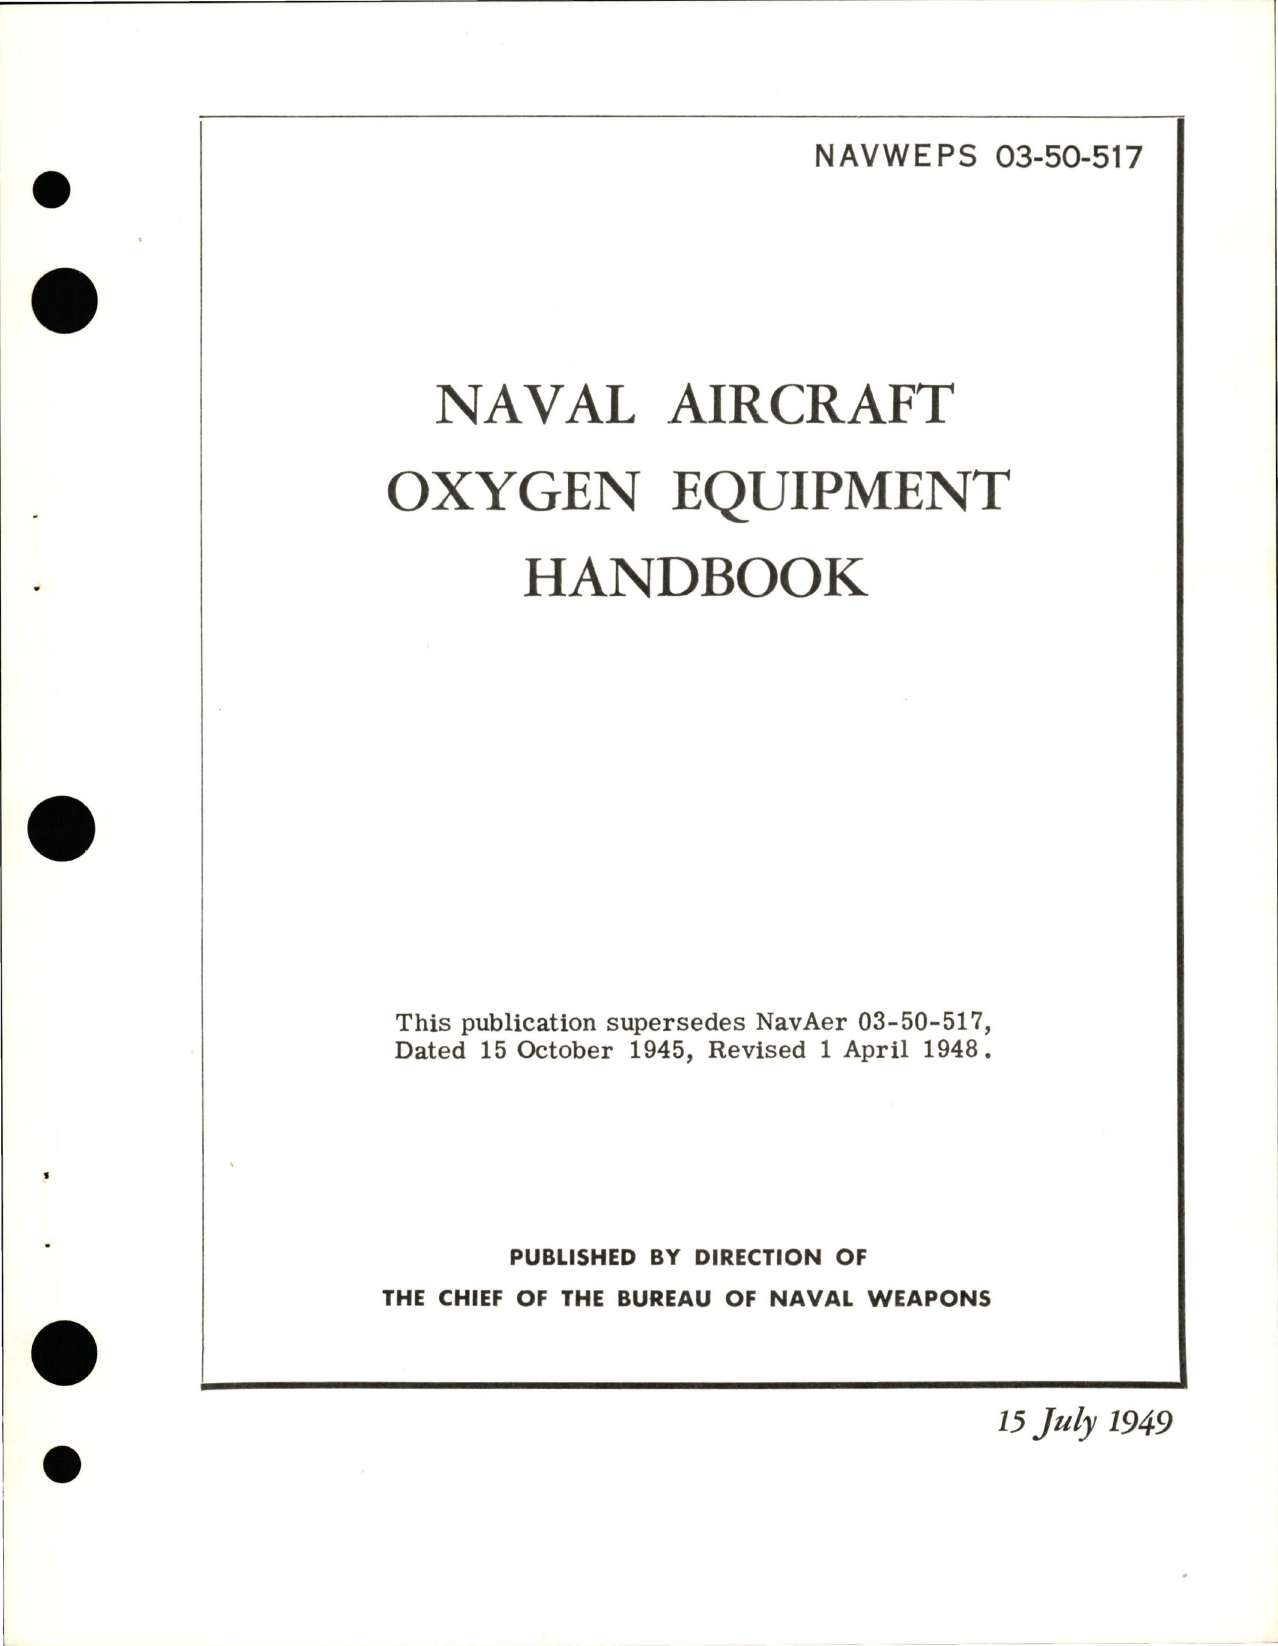 Sample page 1 from AirCorps Library document: Handbook for Naval Aircraft for Oxygen Equipment